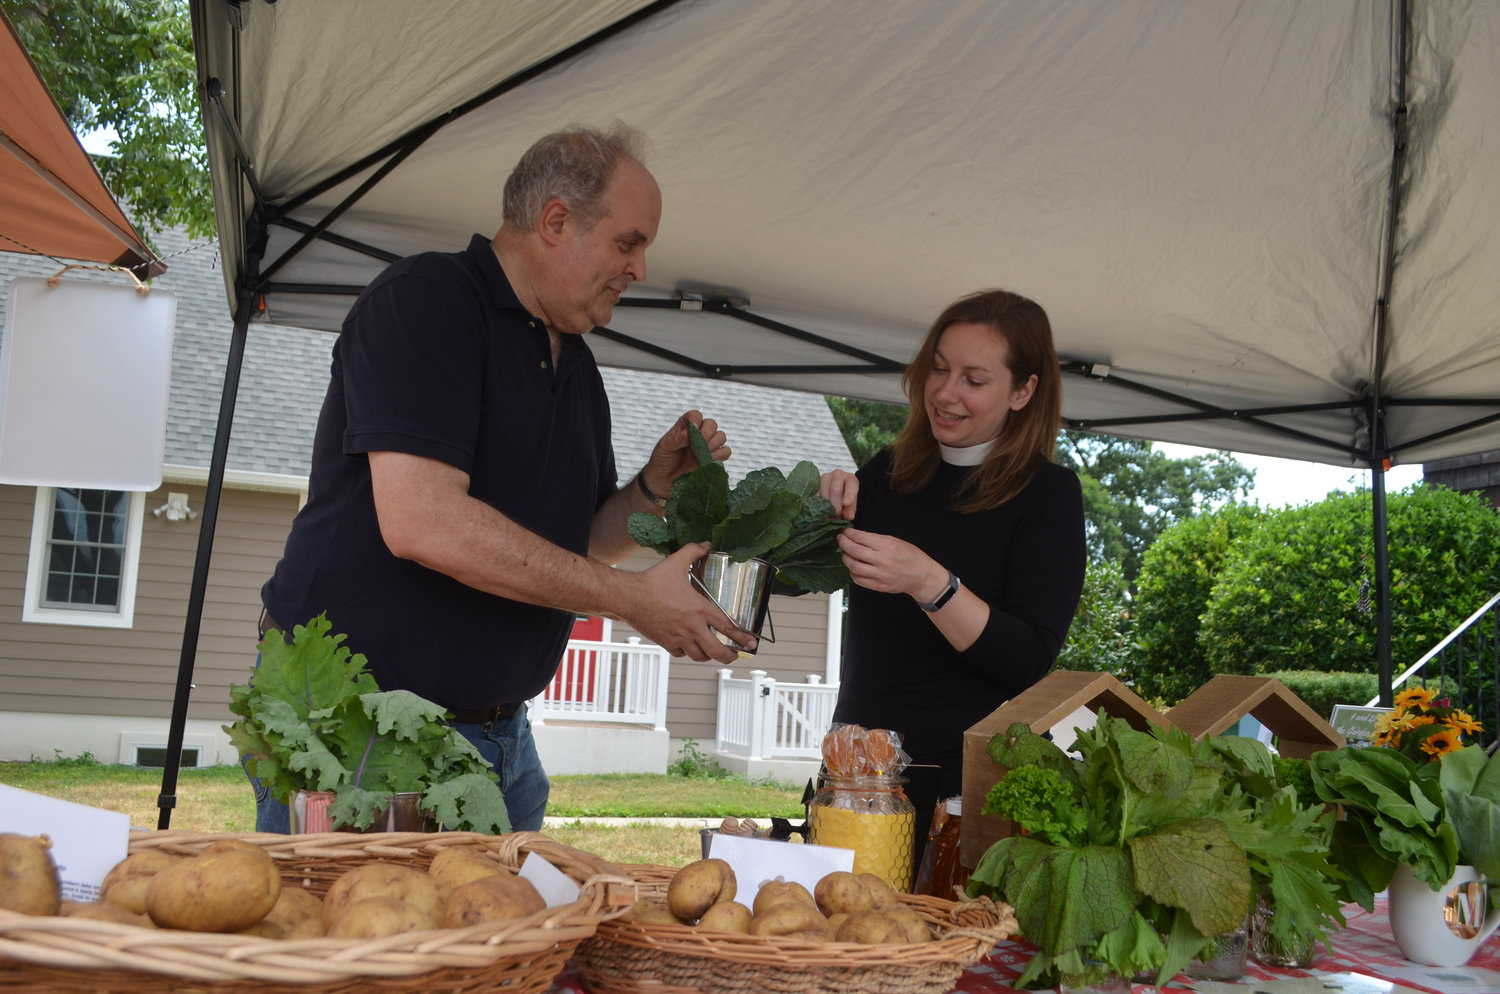 Congregation member and volunteer Carl Bucking took at look at some of the produce.